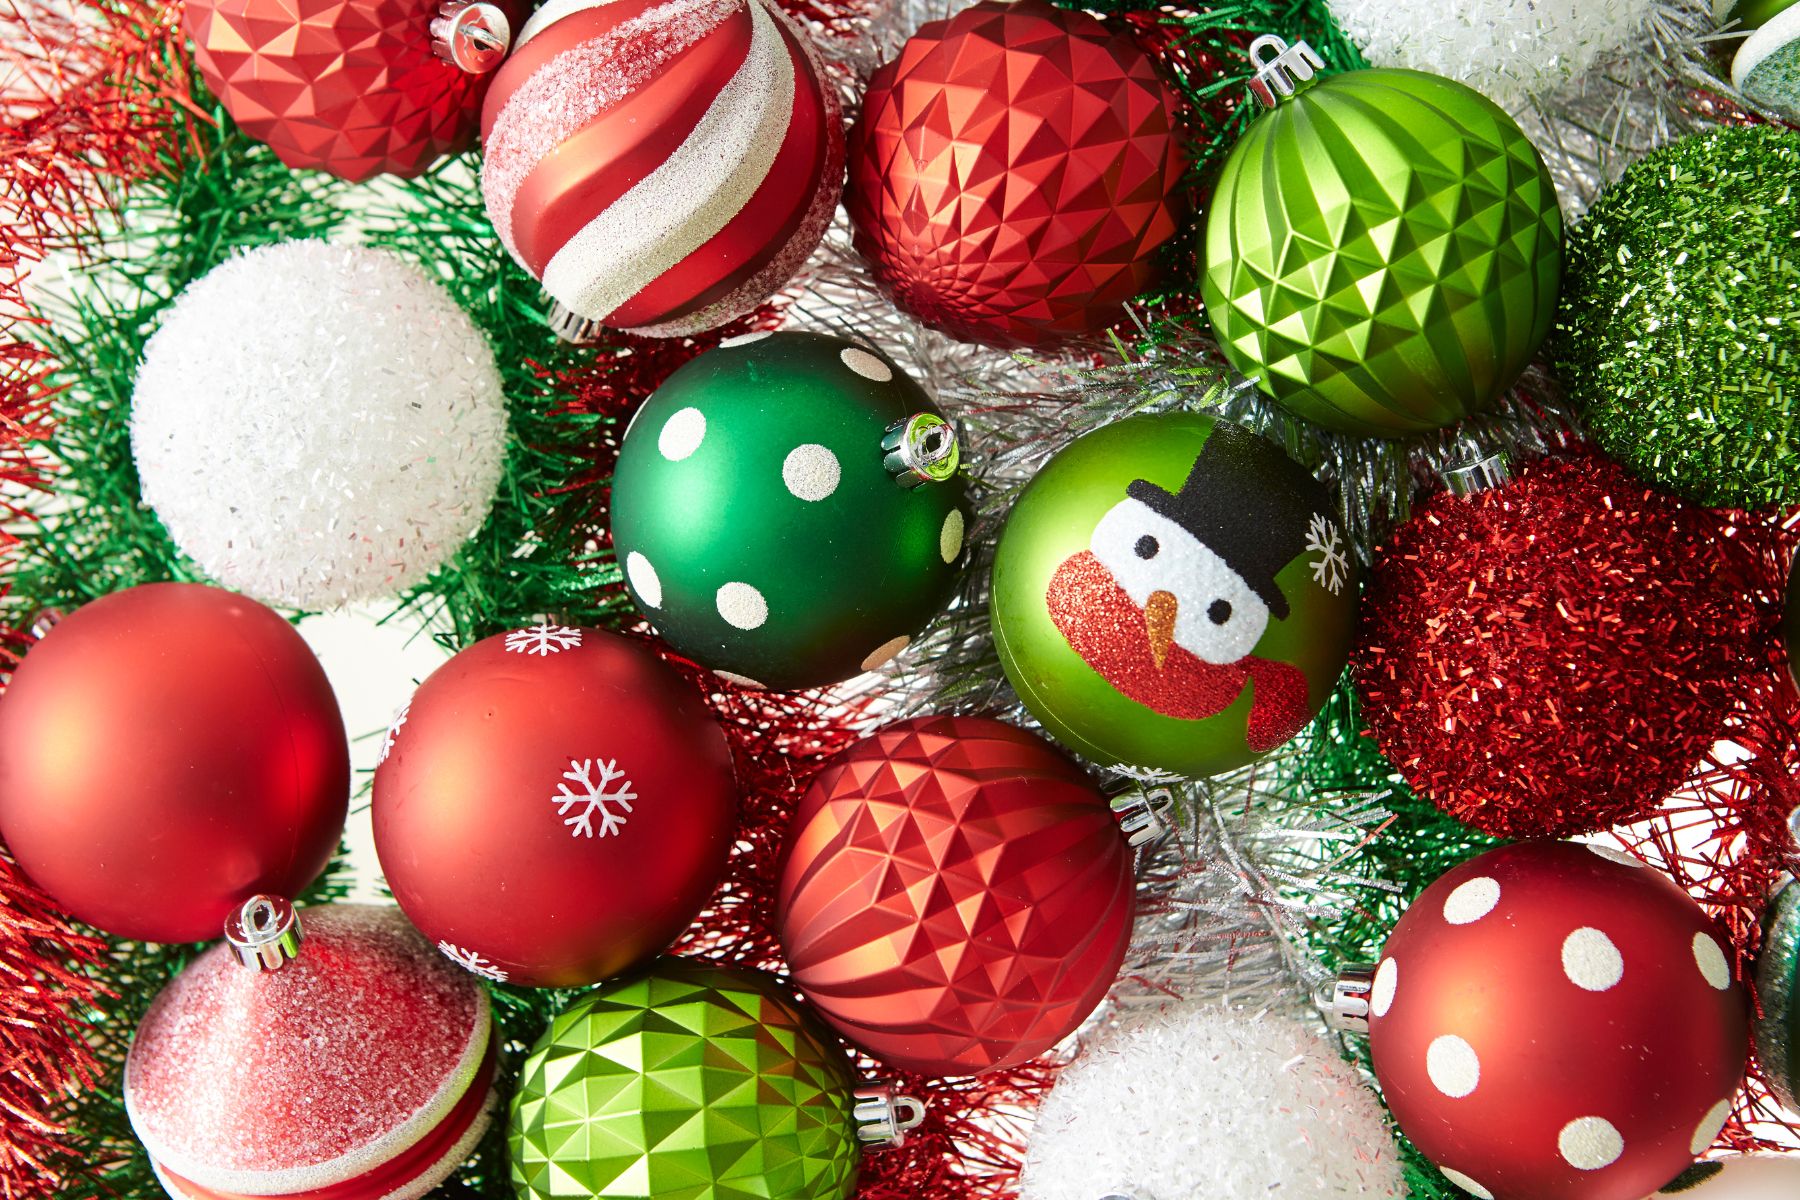 Seasonal items are used occasionally but consistently, like Christmas ornaments